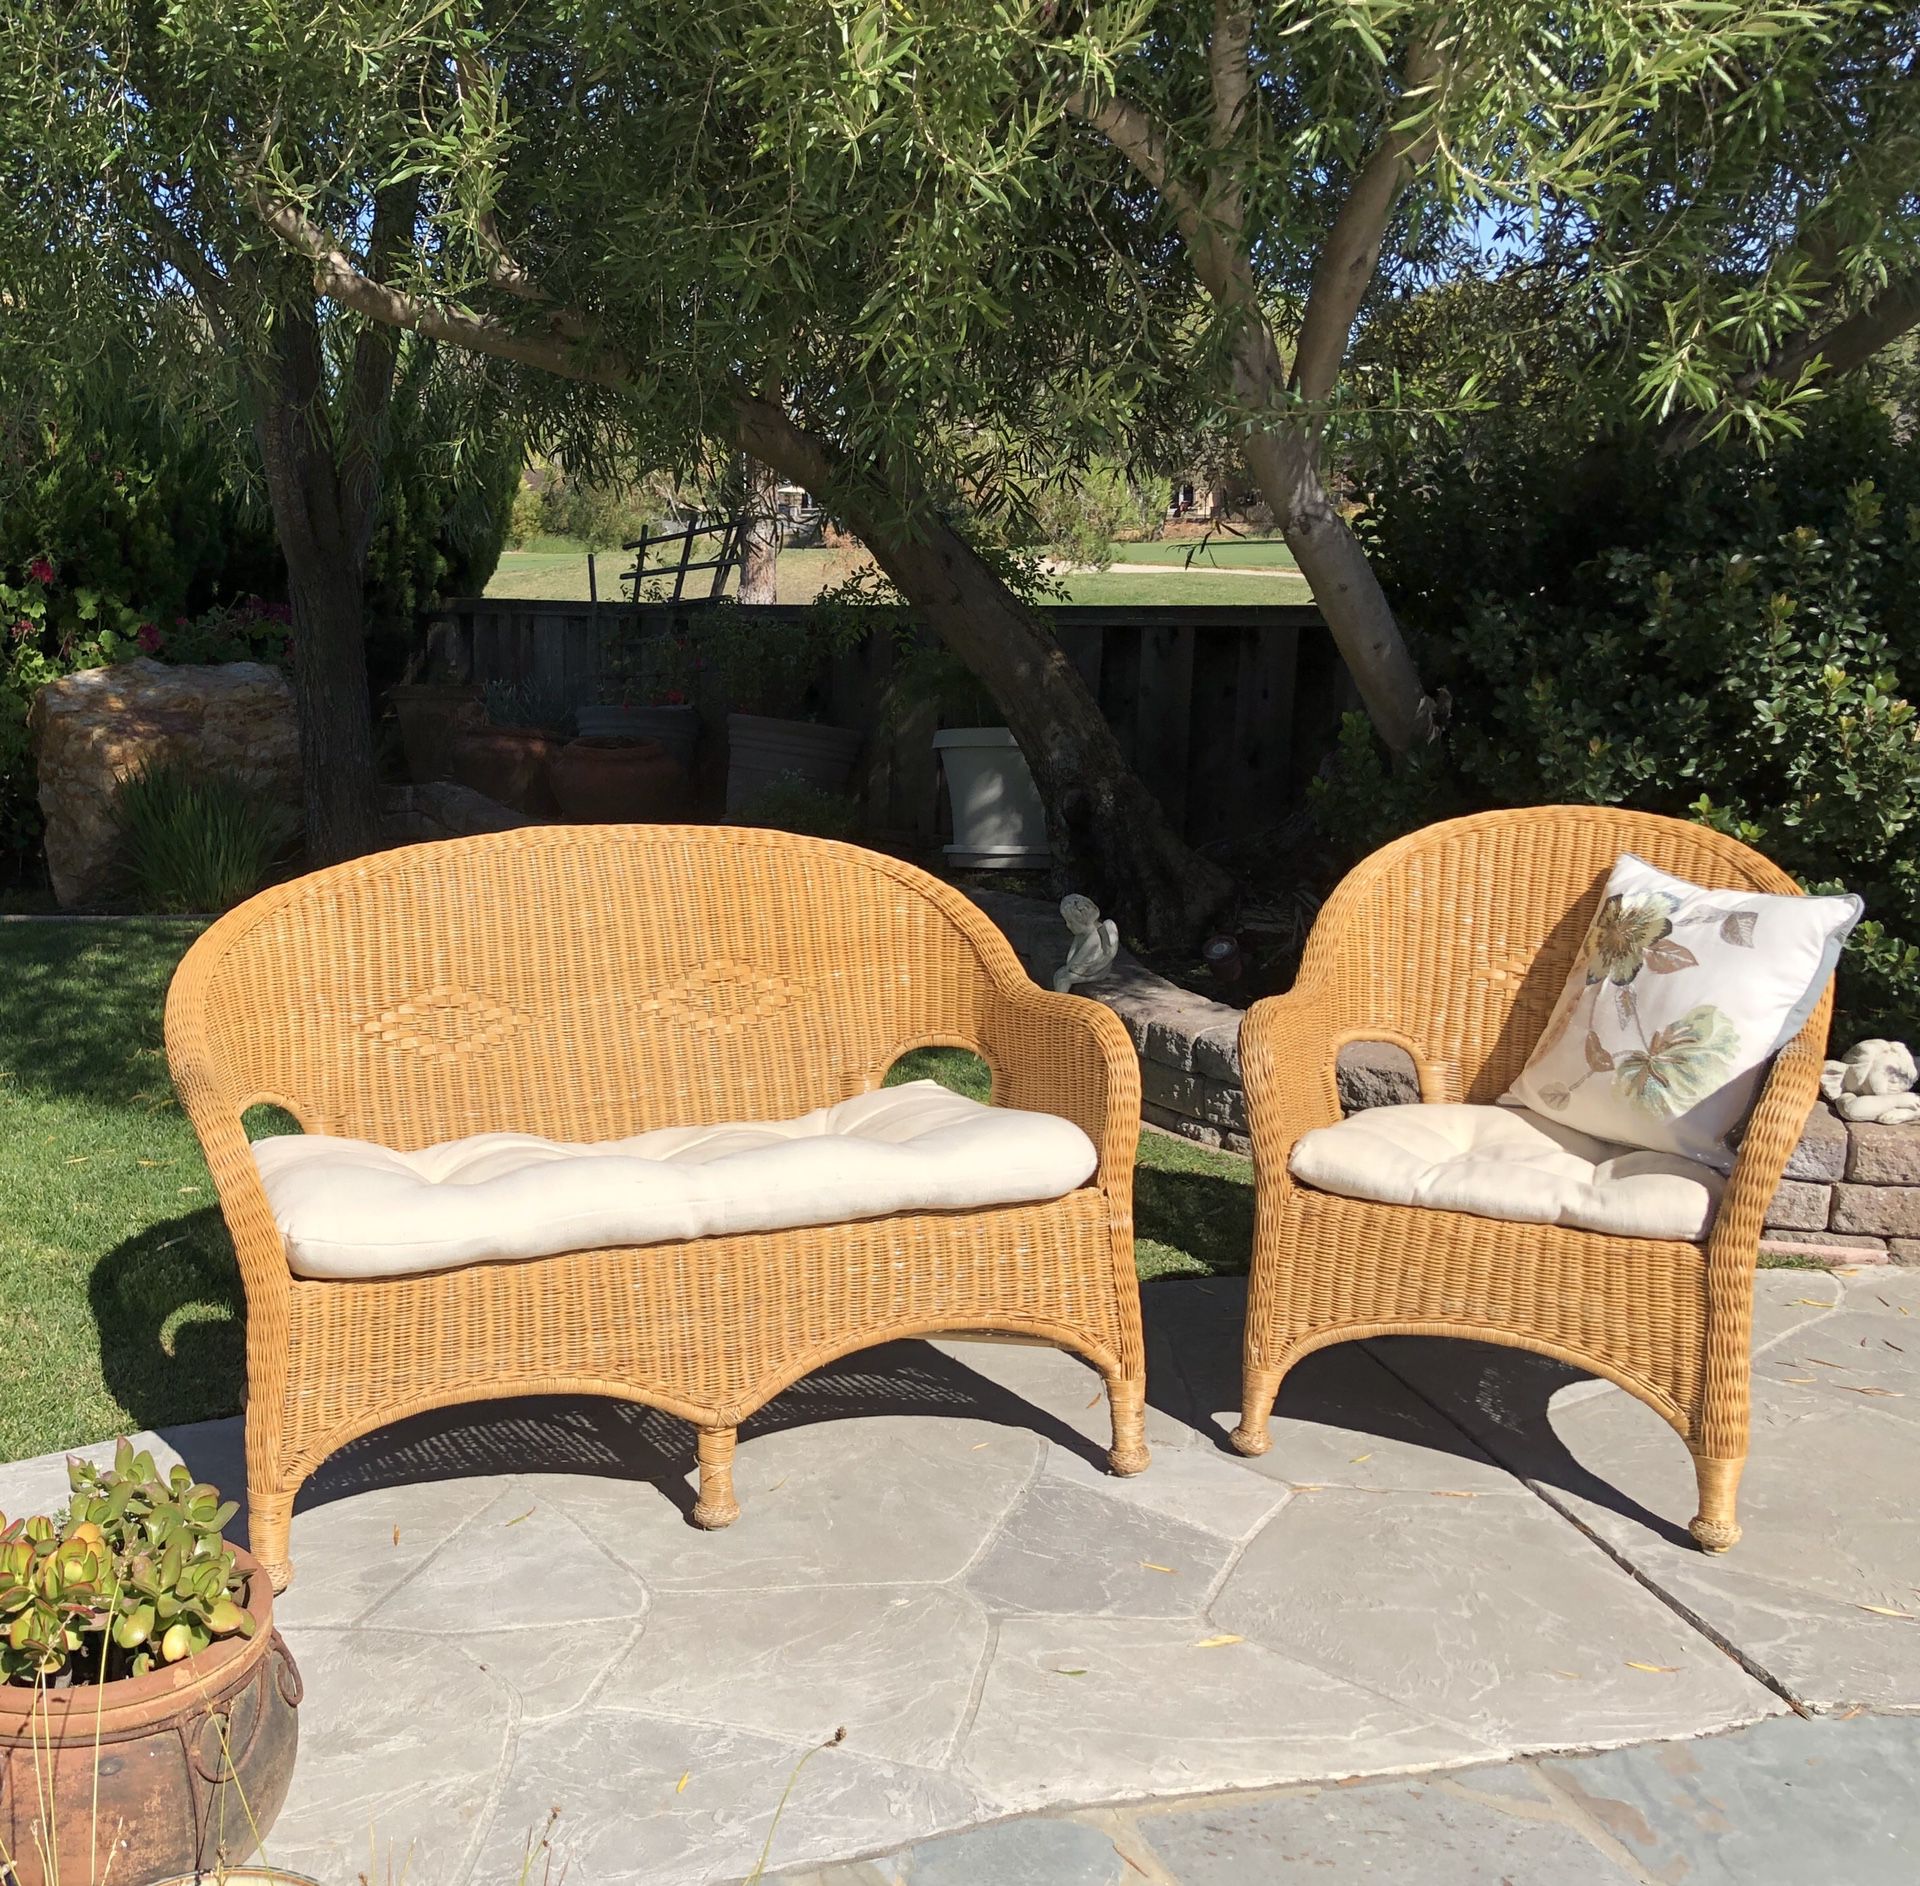 Rattan couch & arm chair